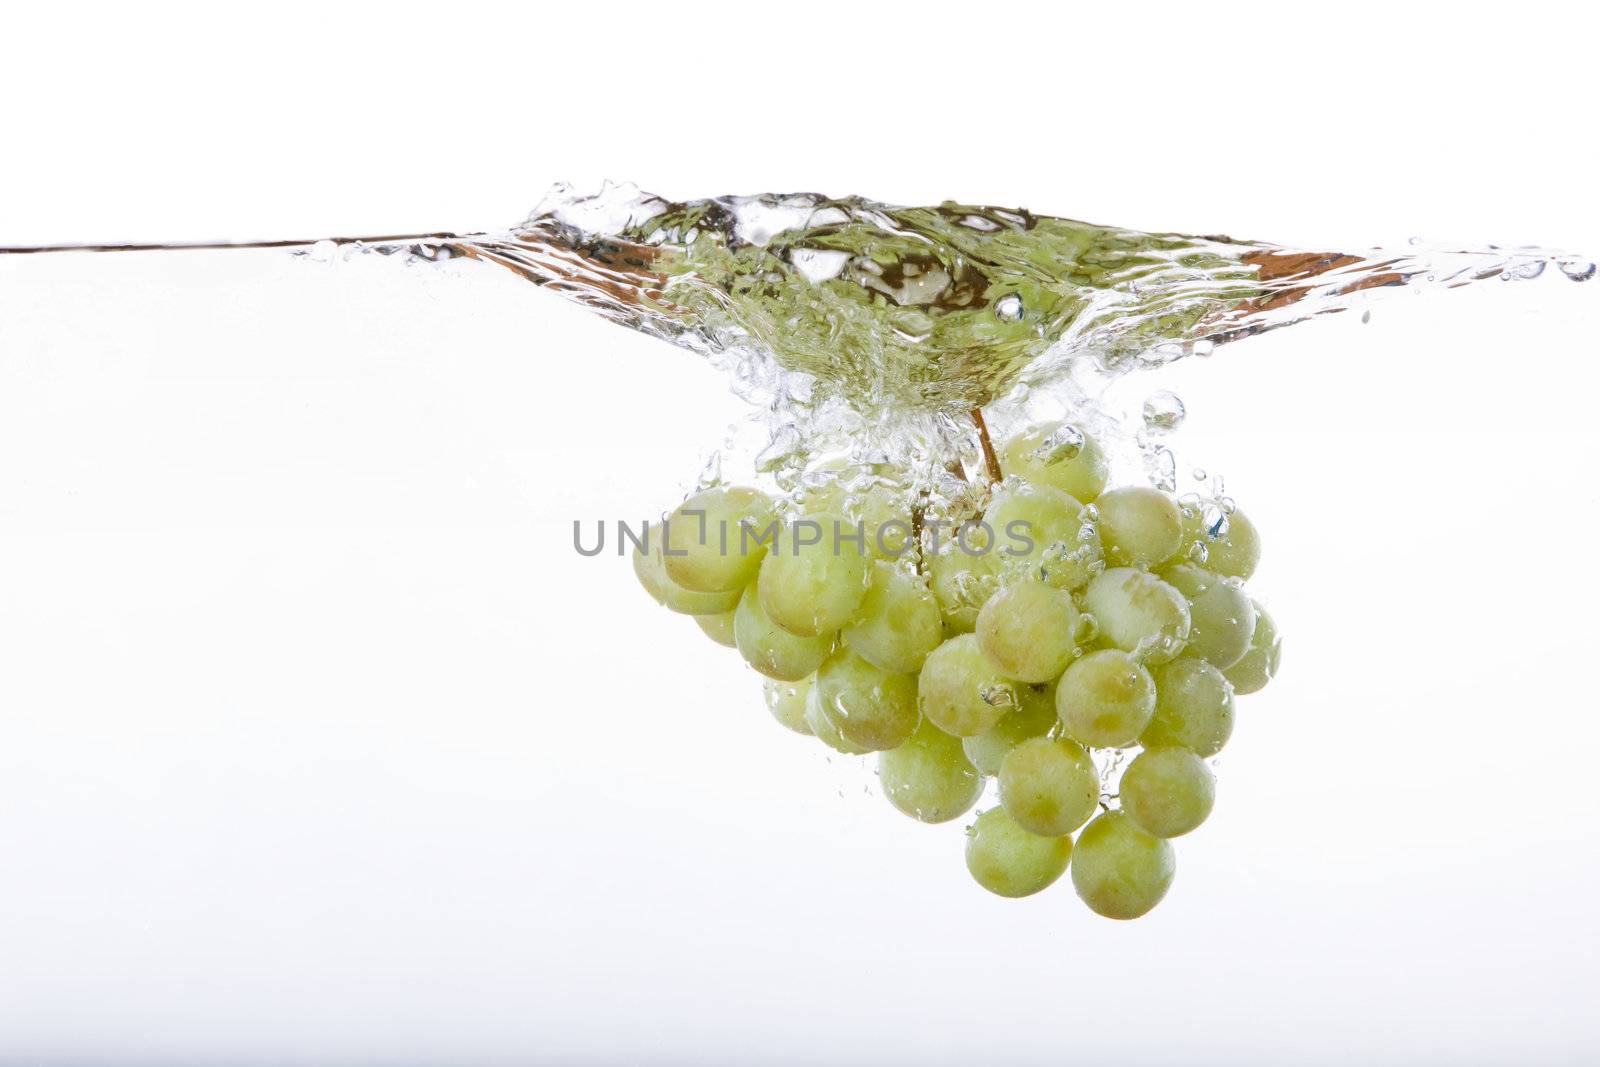 Grapes on the vine in water with splash